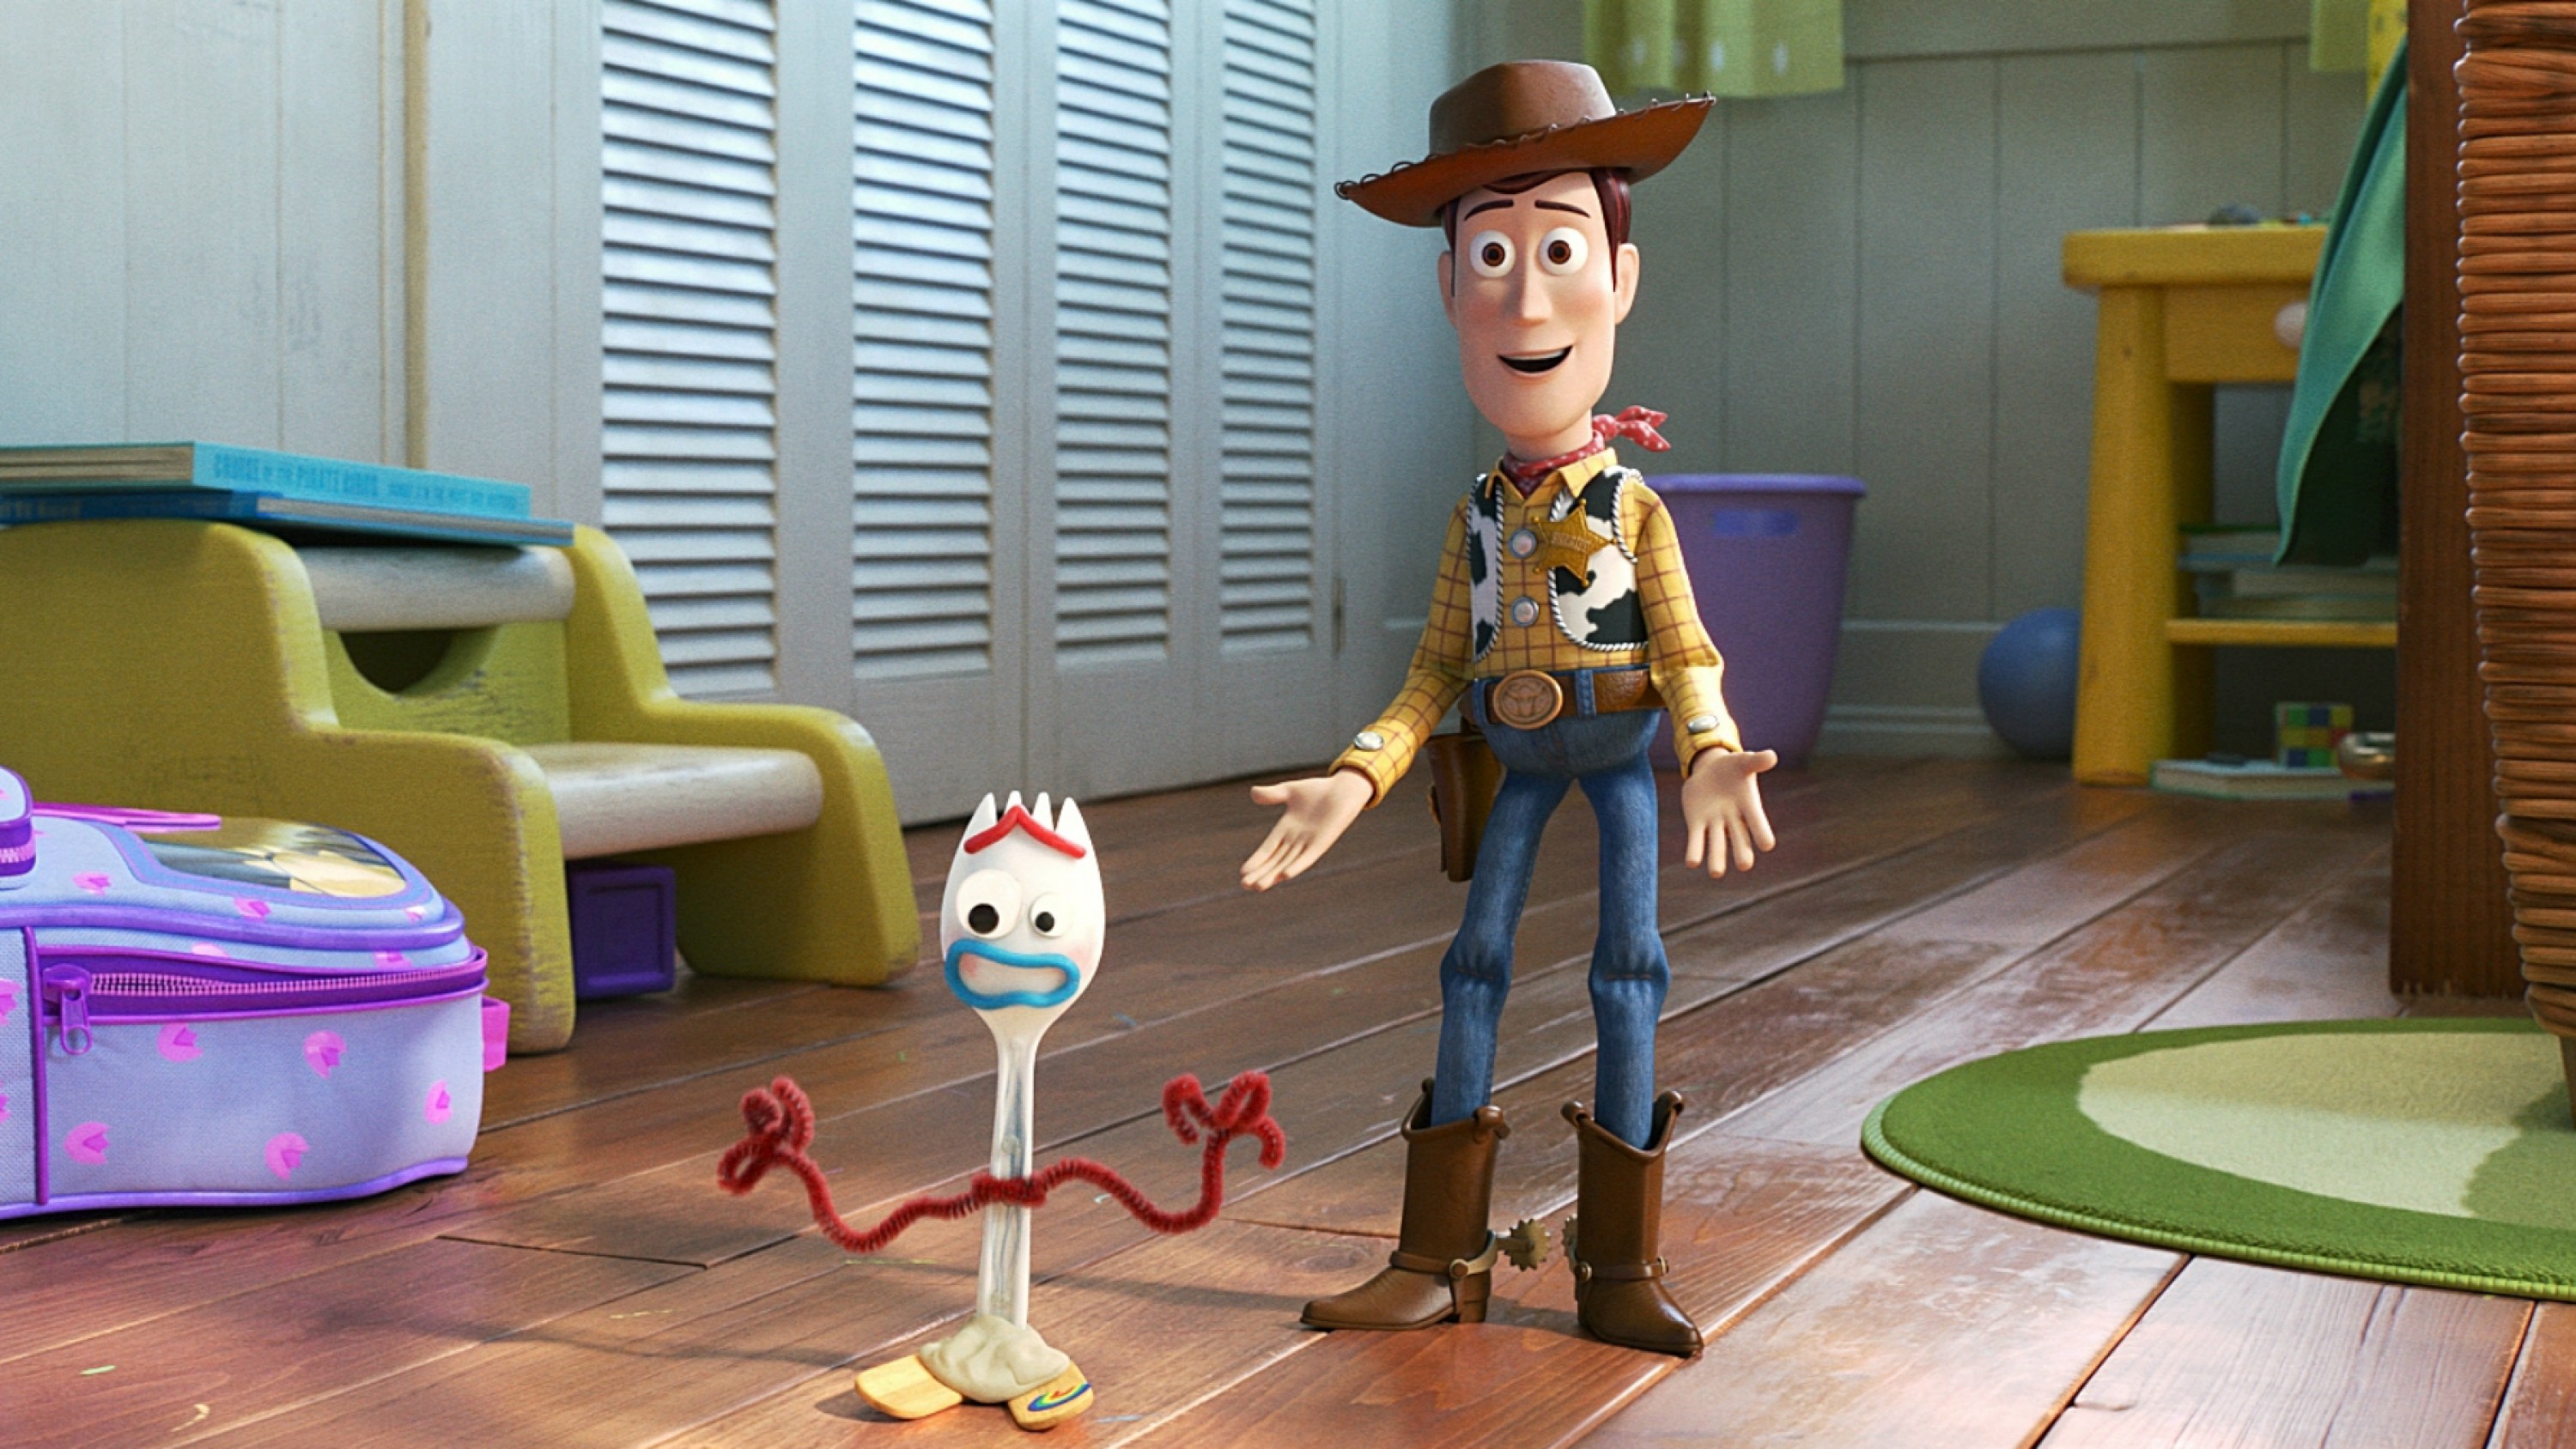 A short PowerPoint of activities focusing on Toy Story 4. thumbnail